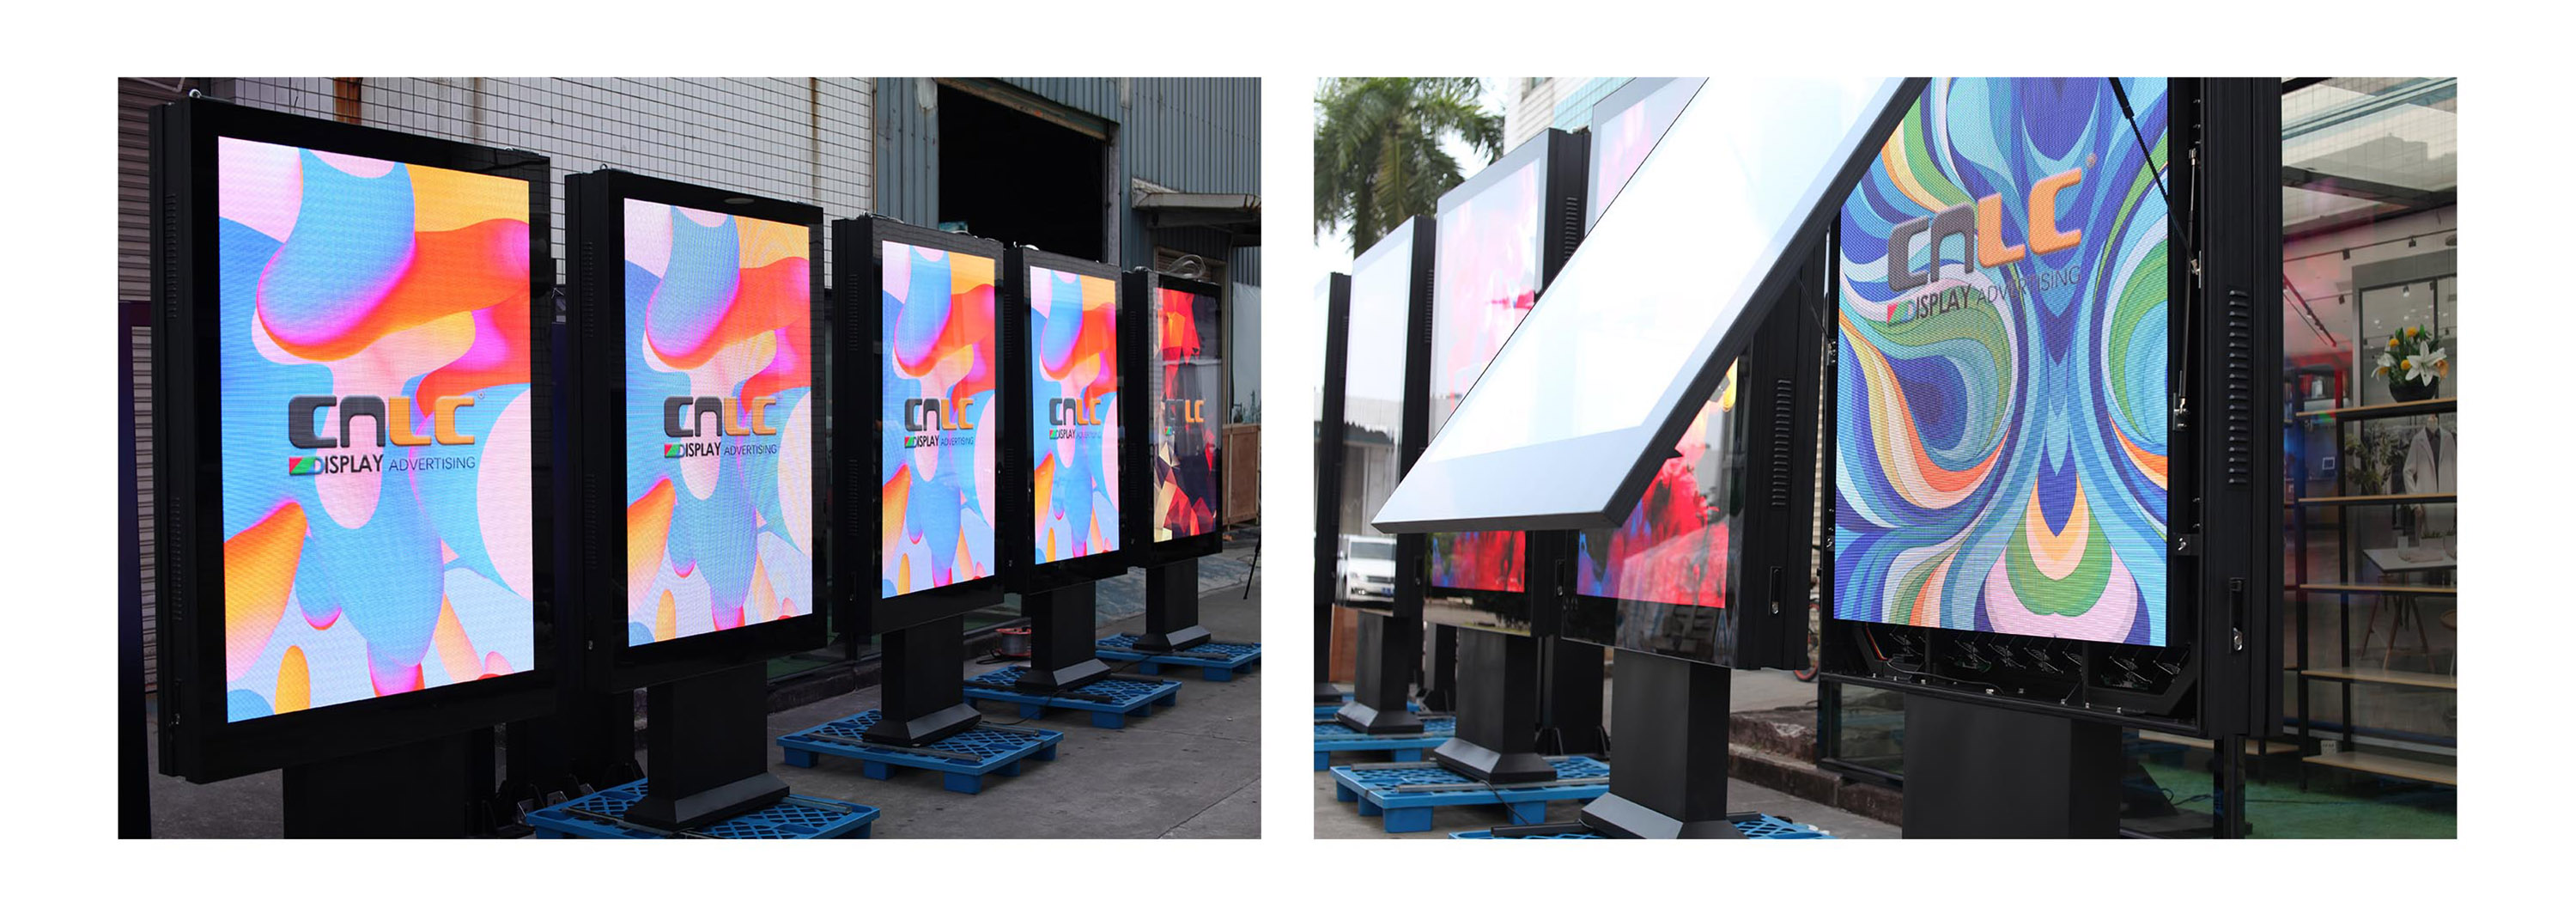 Dual-sided LED billboard with thermal management system for snow-covered environments